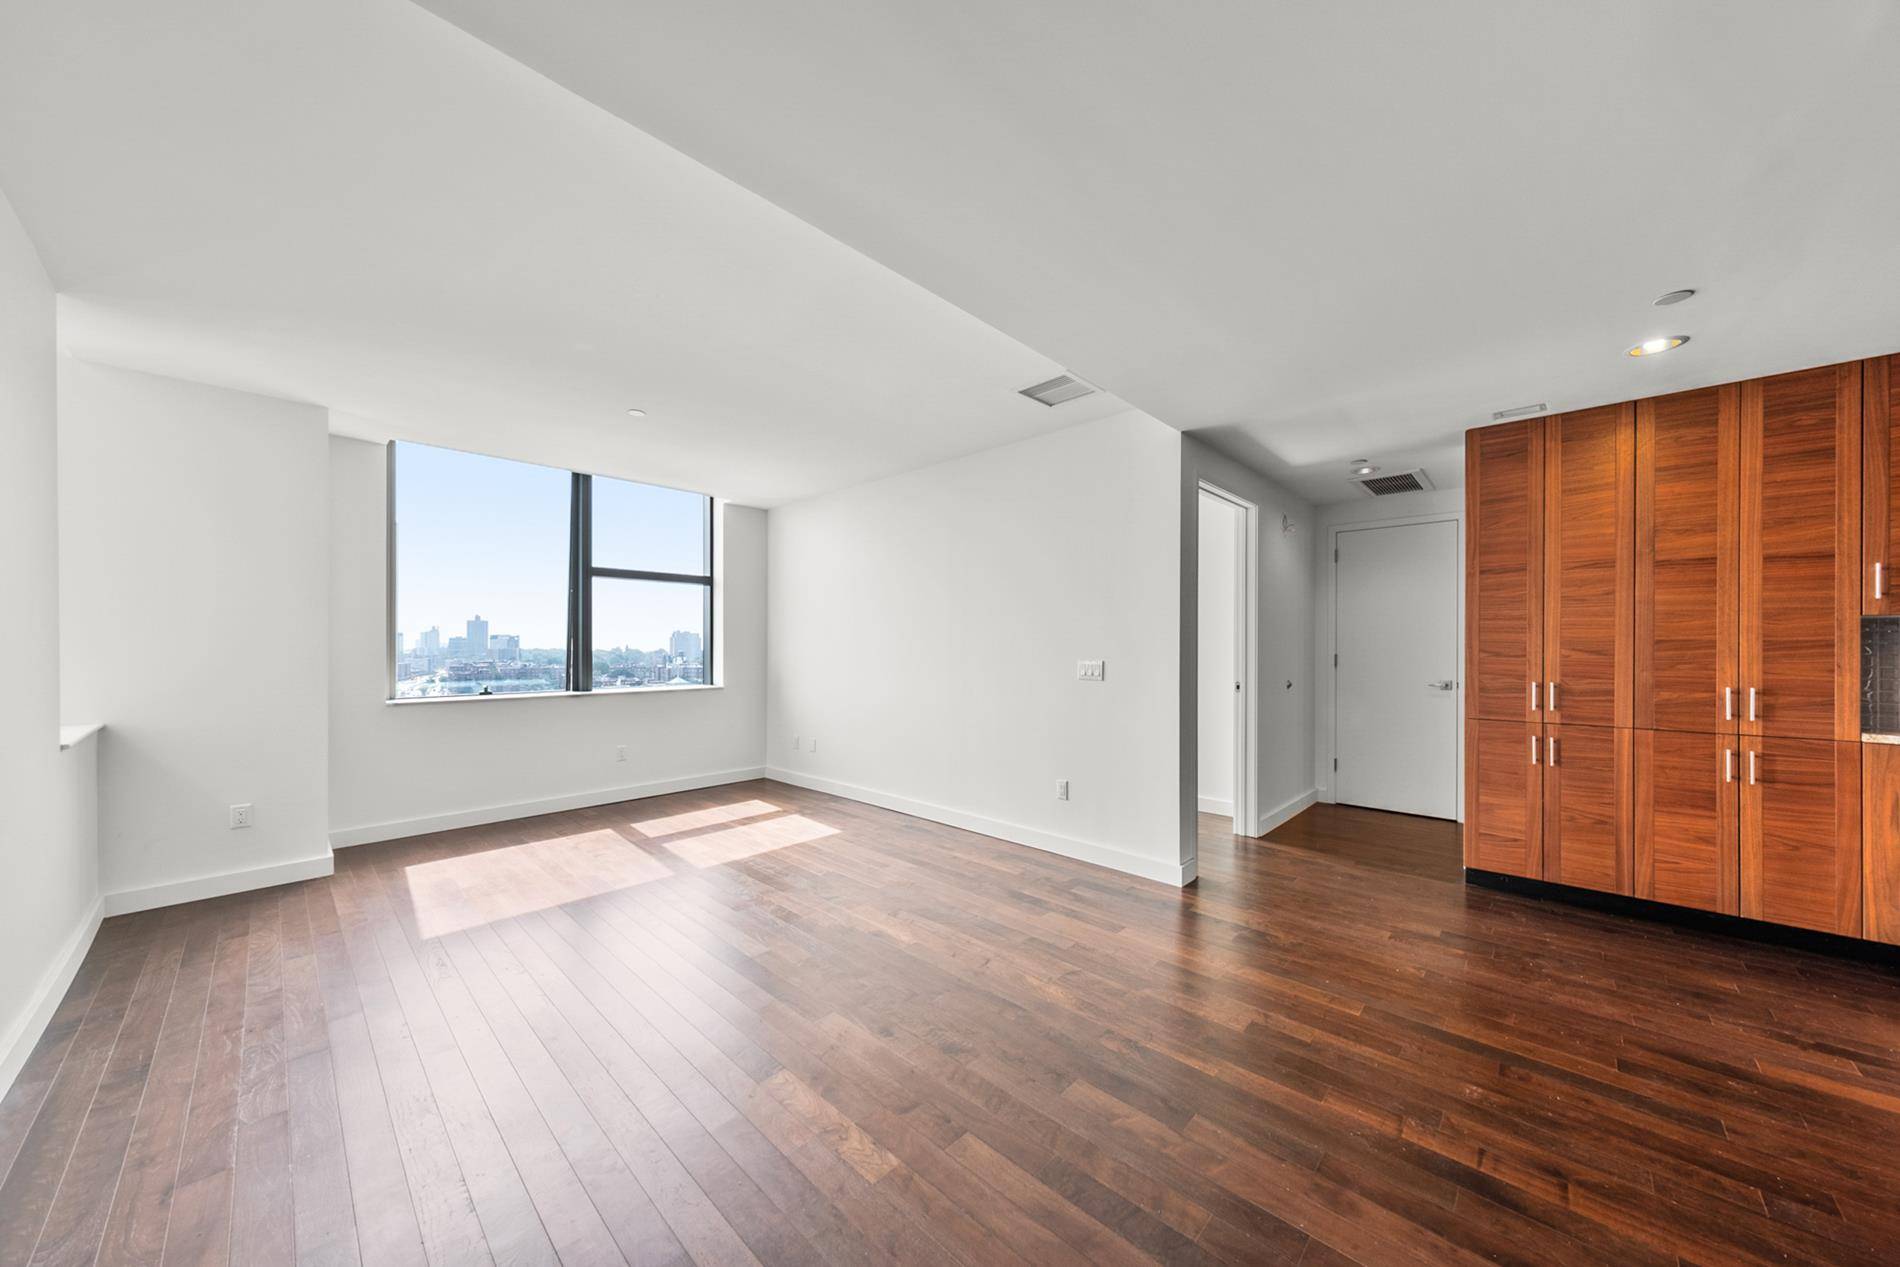 Teleport yourself above the horizon in this sun drenched, 16th floor residence in The Aston, Forest Hill s most sought after full service, condominium building.